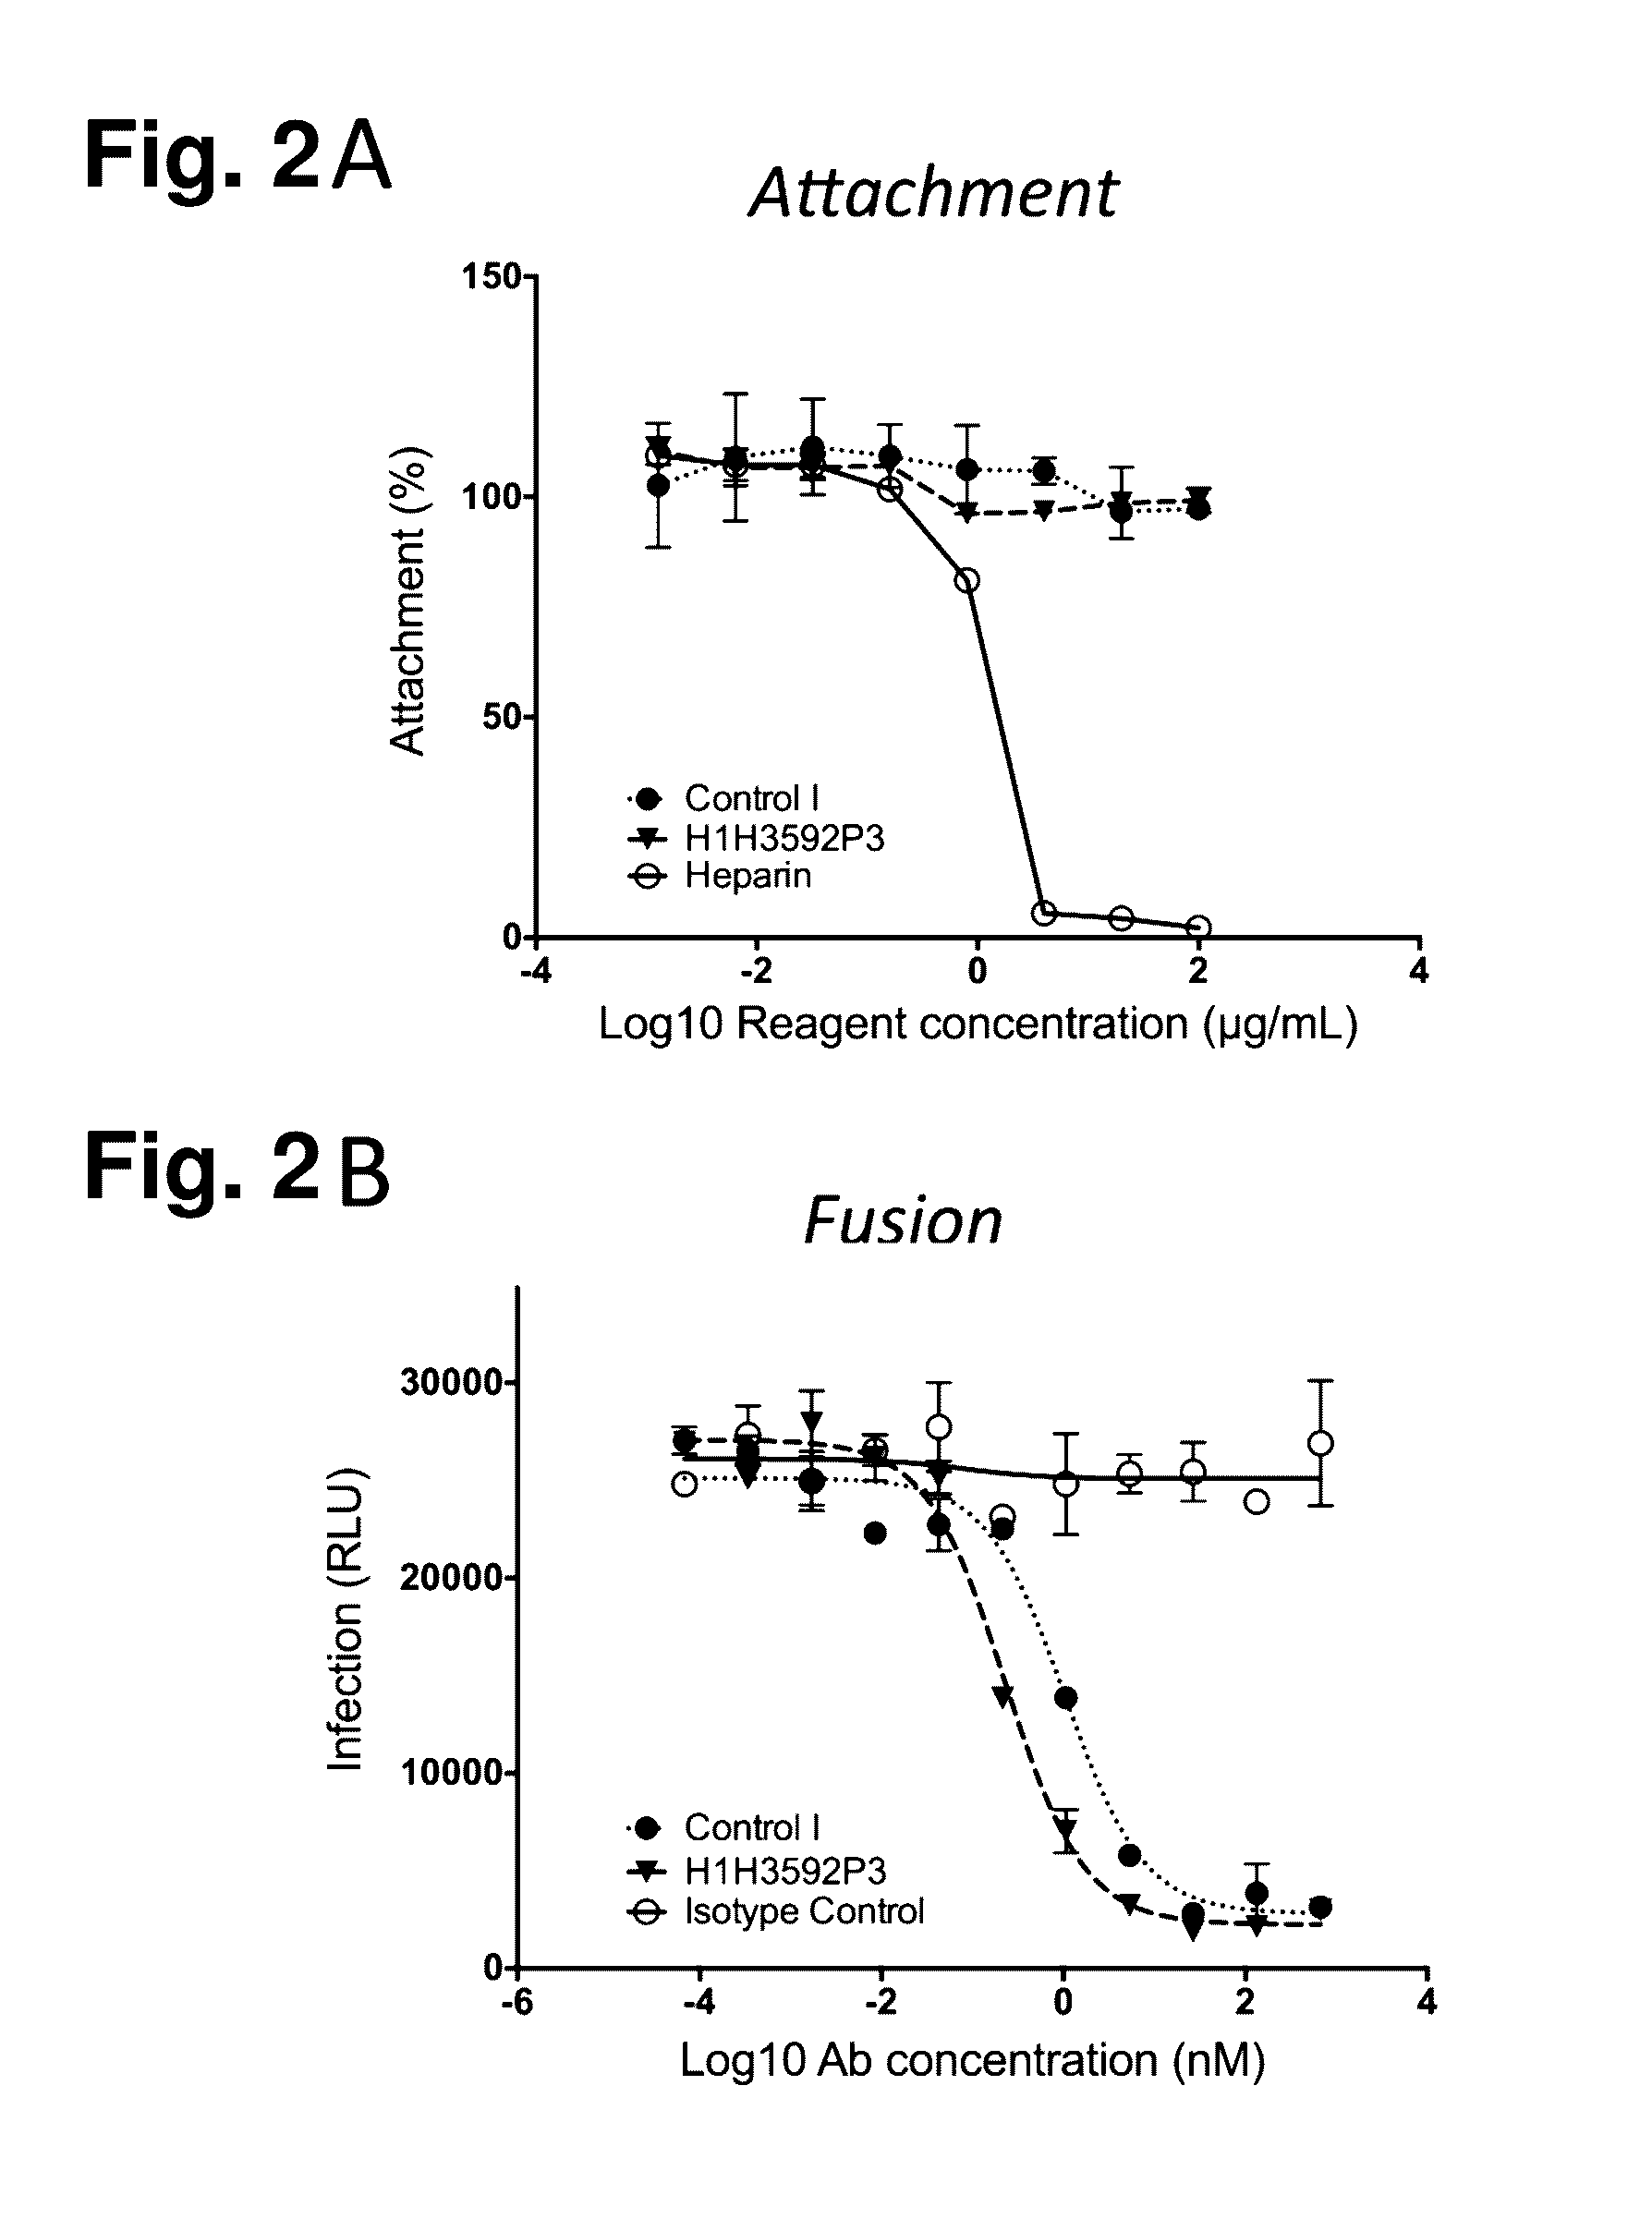 Human Antibodies to Respiratory Syncytial Virus F Protein and Methods of Use Thereof